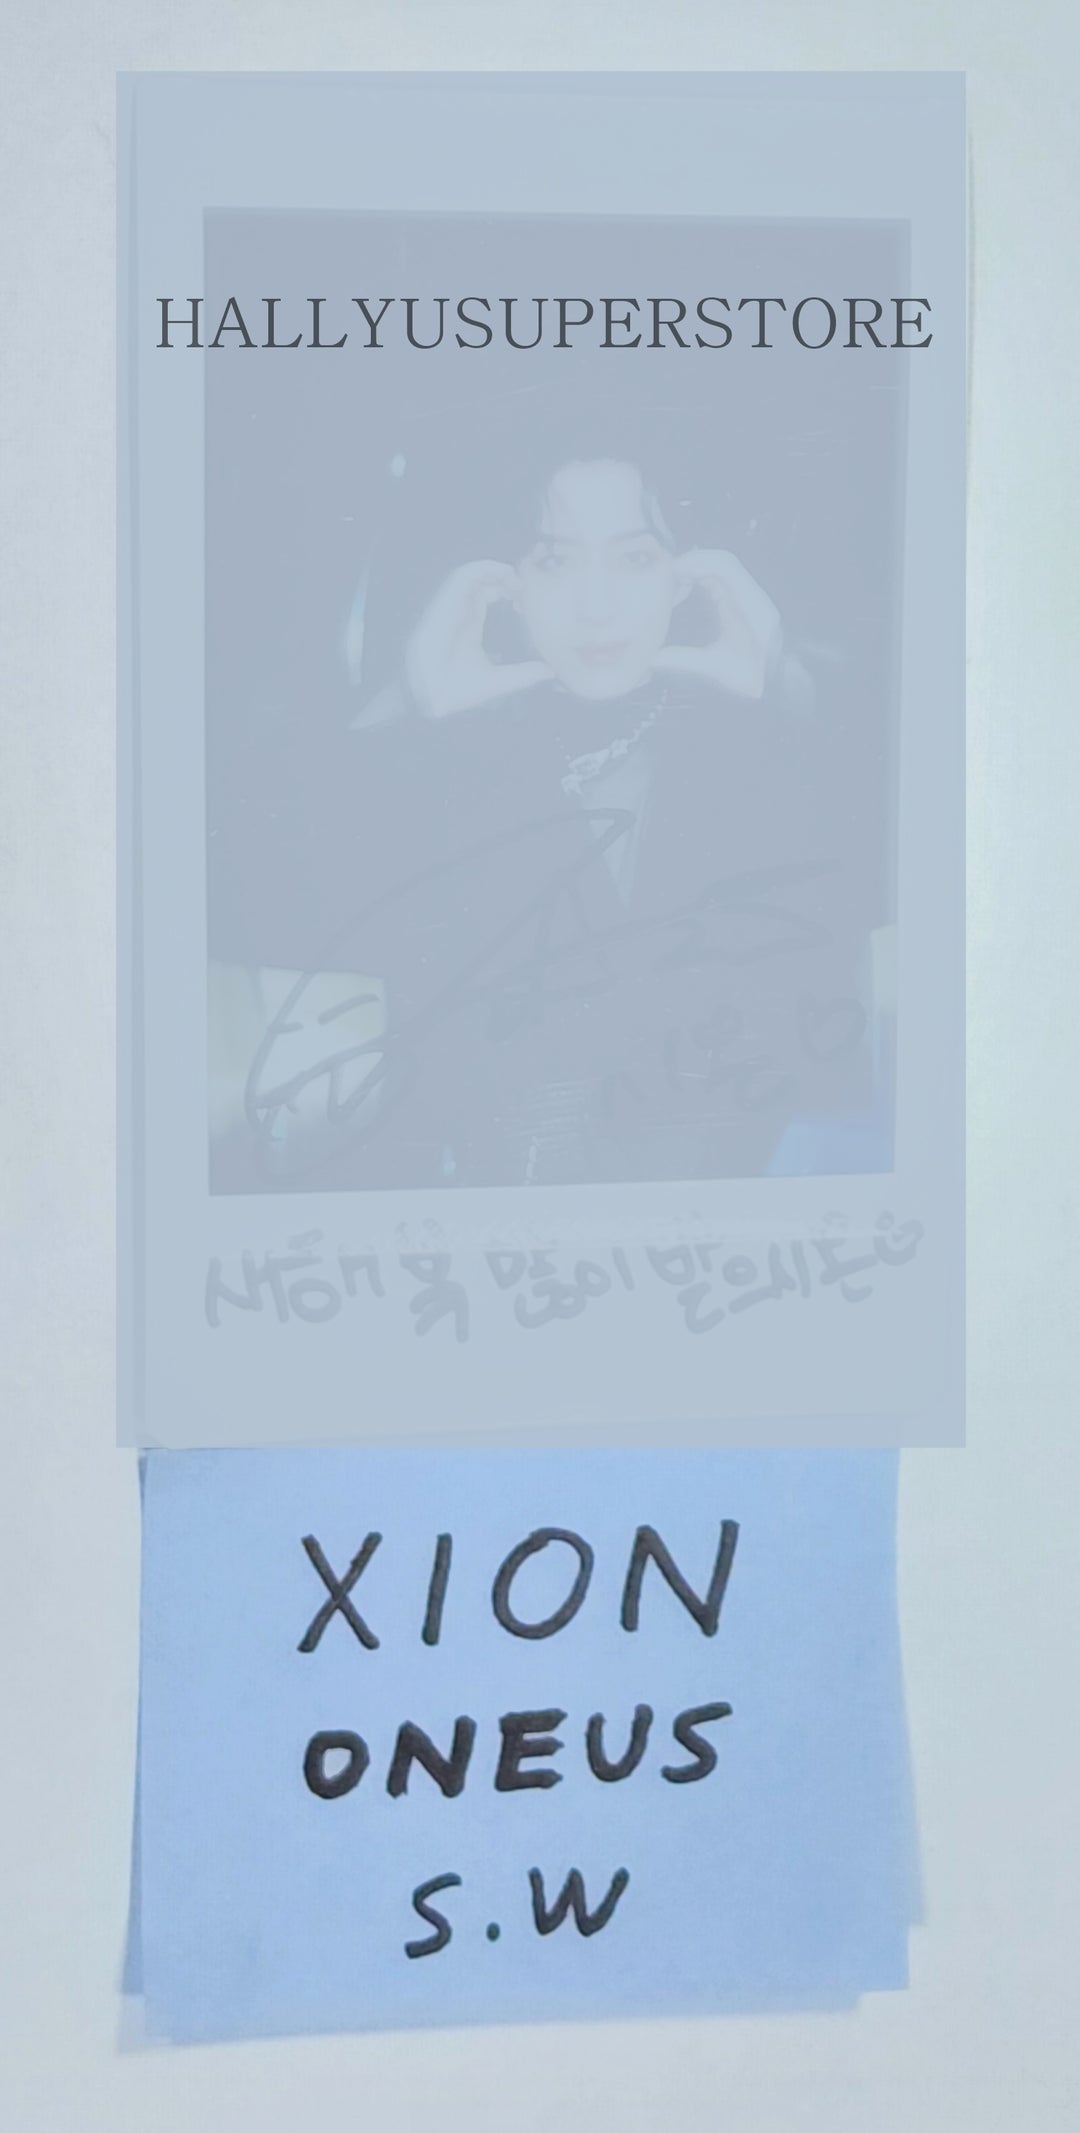 Xion (of Oneus) "MALUS" - Hand Autographed(Signed) Polaroid